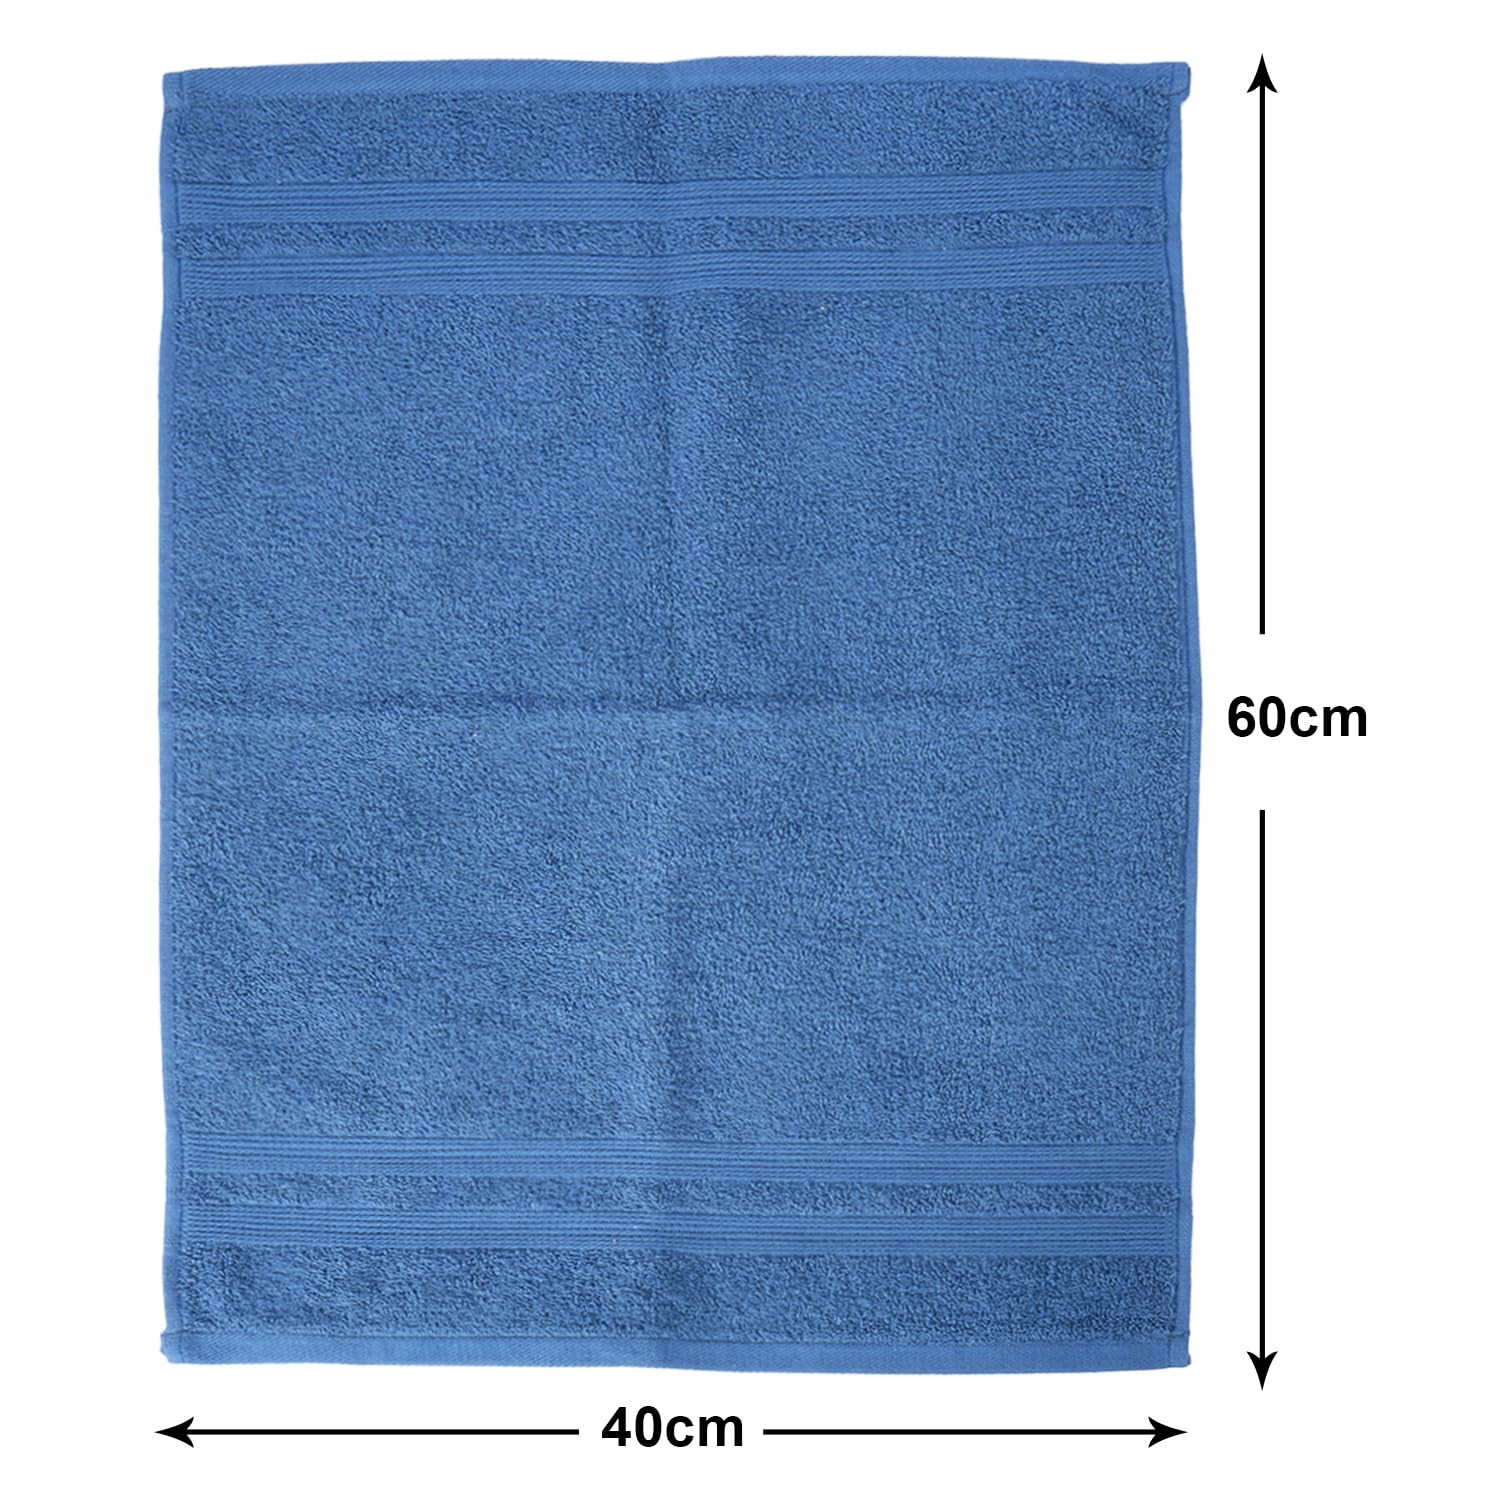 Kuber Industries 525 GSM Cotton Hand towels |Super Soft, Quick Absorbent & Anti-Bacterial|Gym & Workout Towels|Pack of 2 (Blue & Ivory)